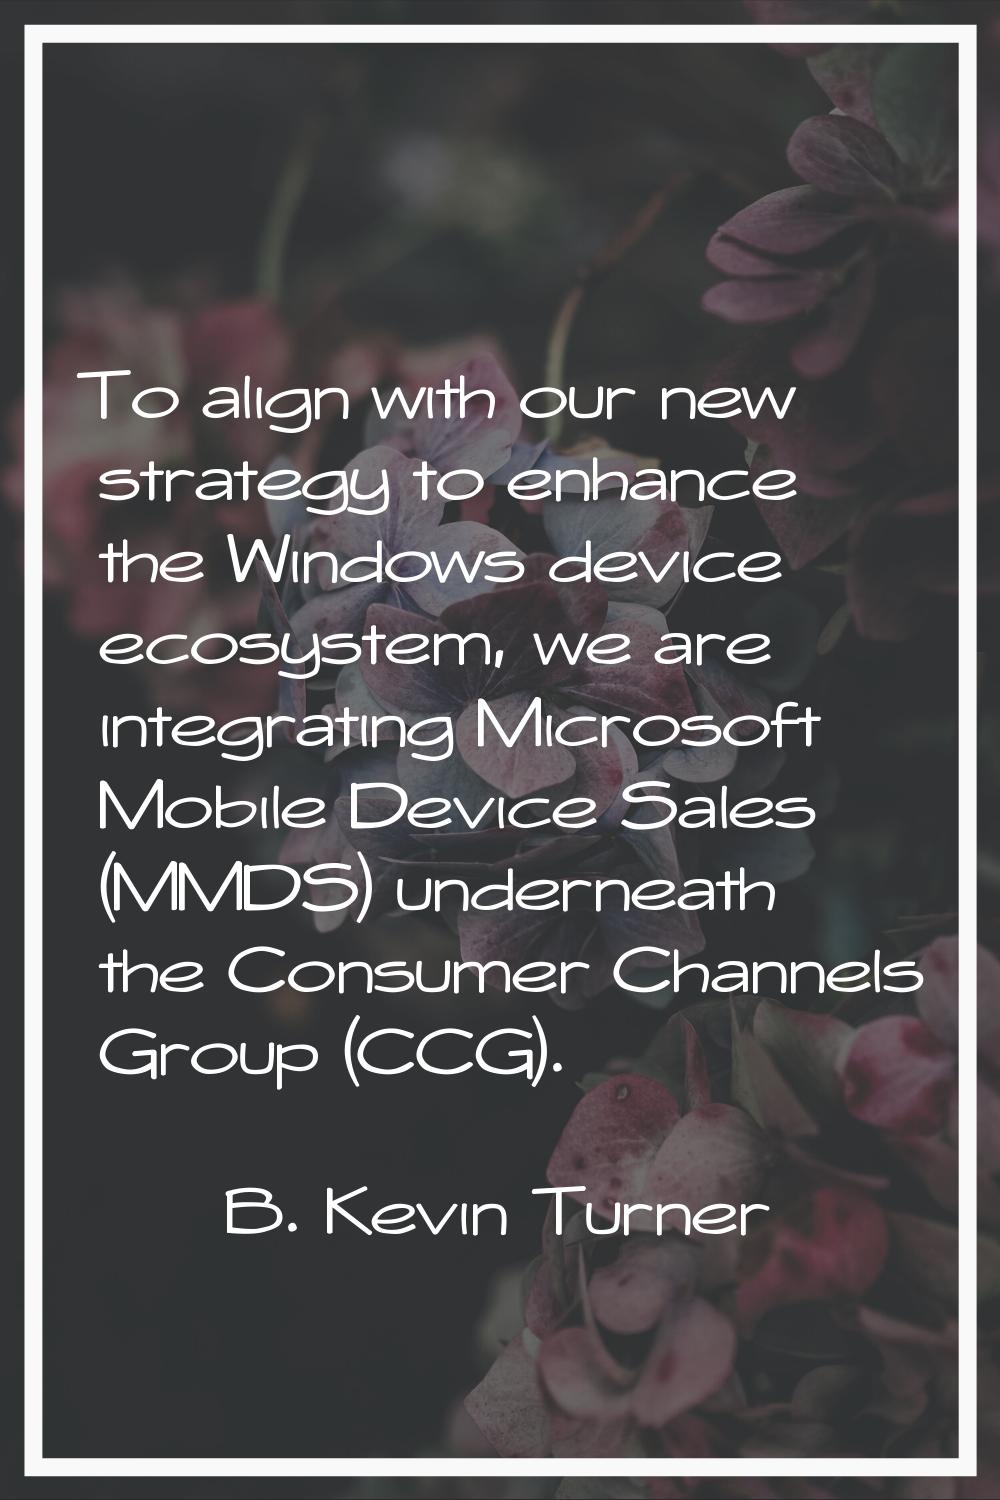 To align with our new strategy to enhance the Windows device ecosystem, we are integrating Microsof